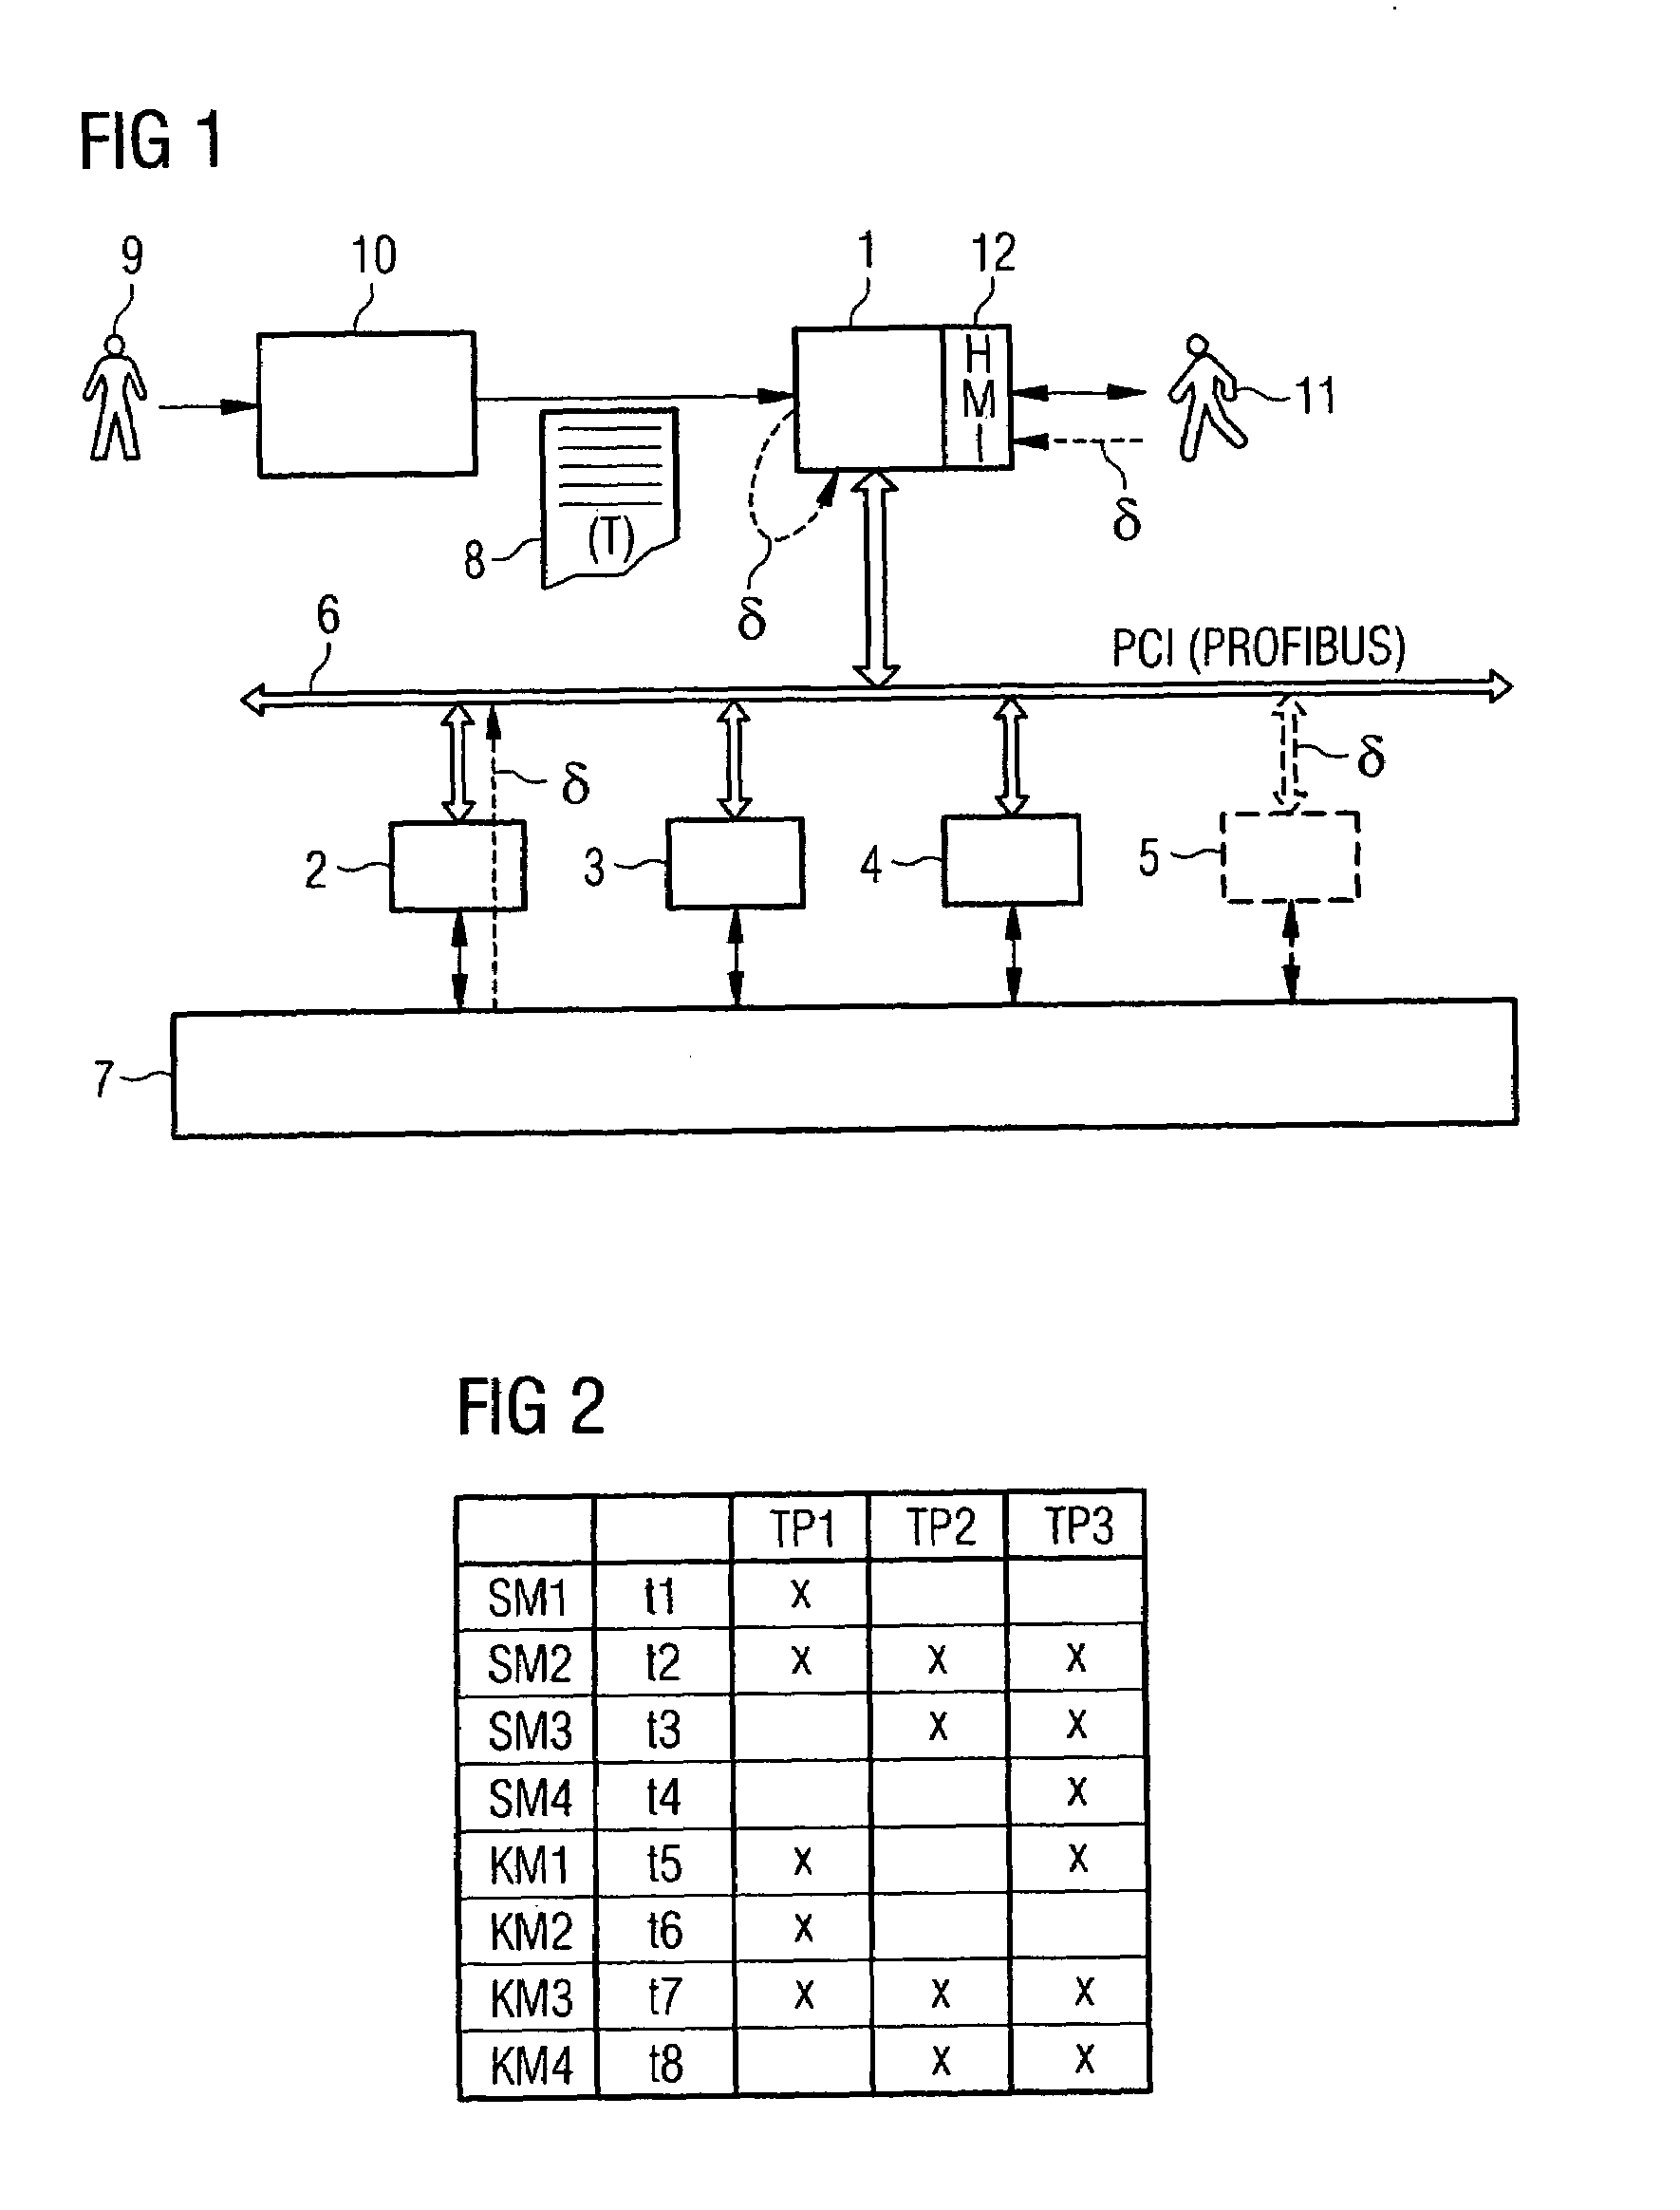 Method of operation and a control program for a central unit in an automation system